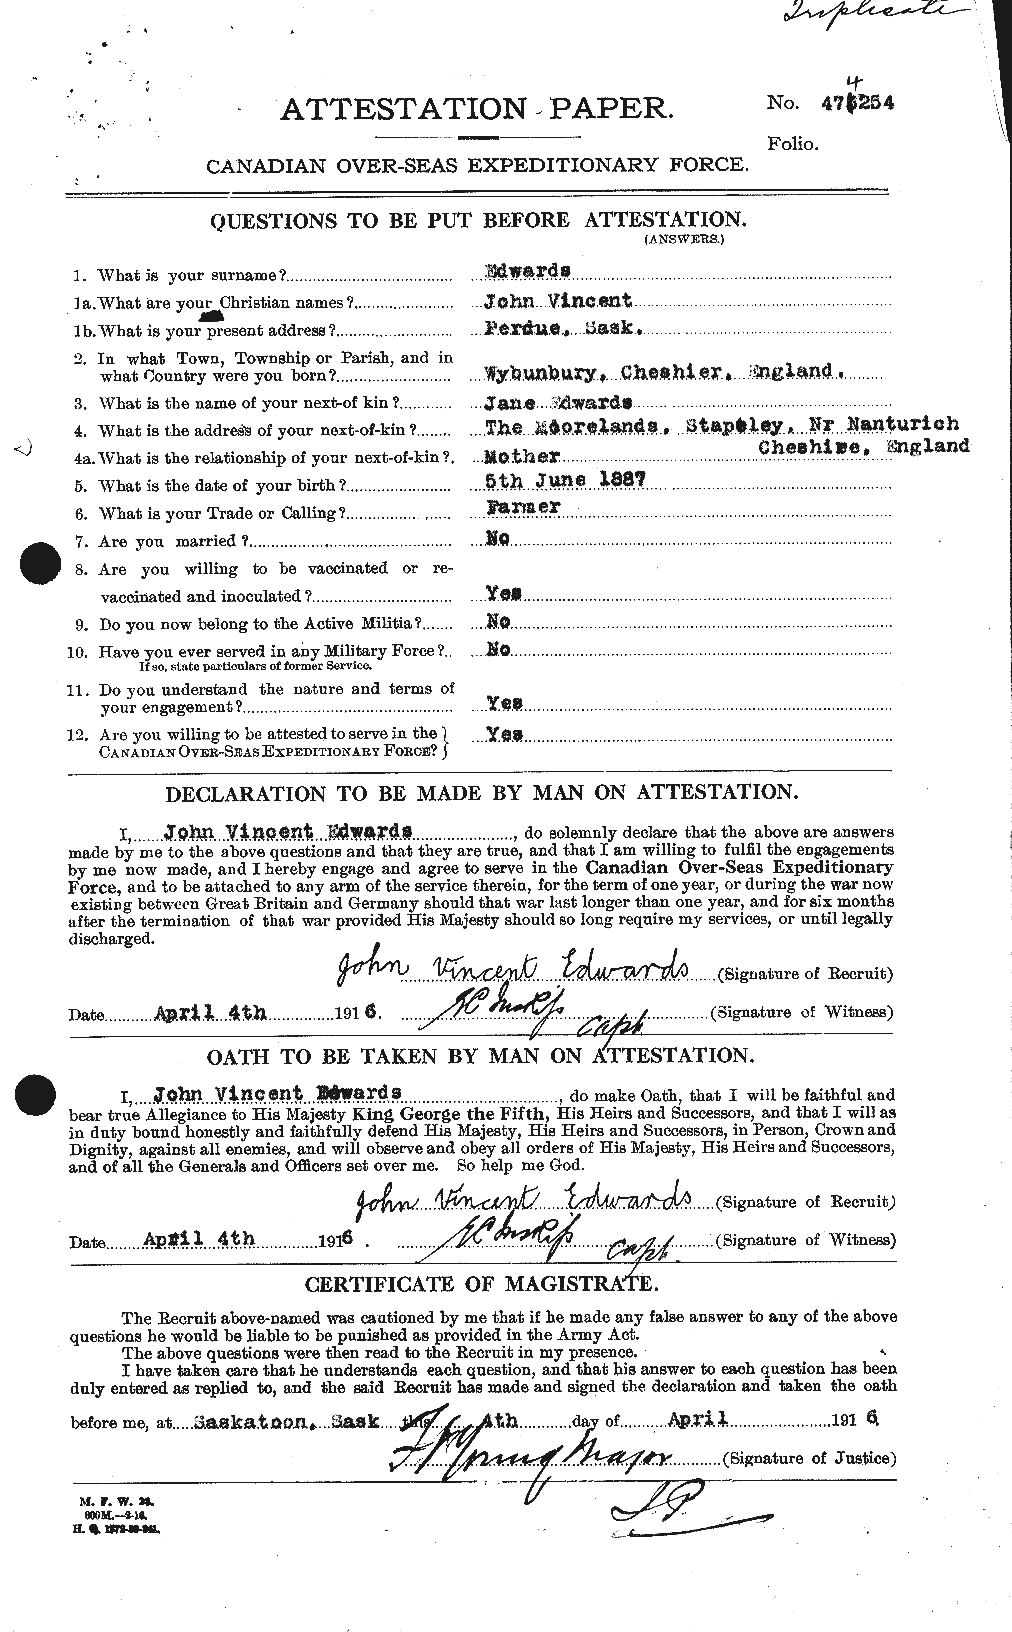 Personnel Records of the First World War - CEF 310159a